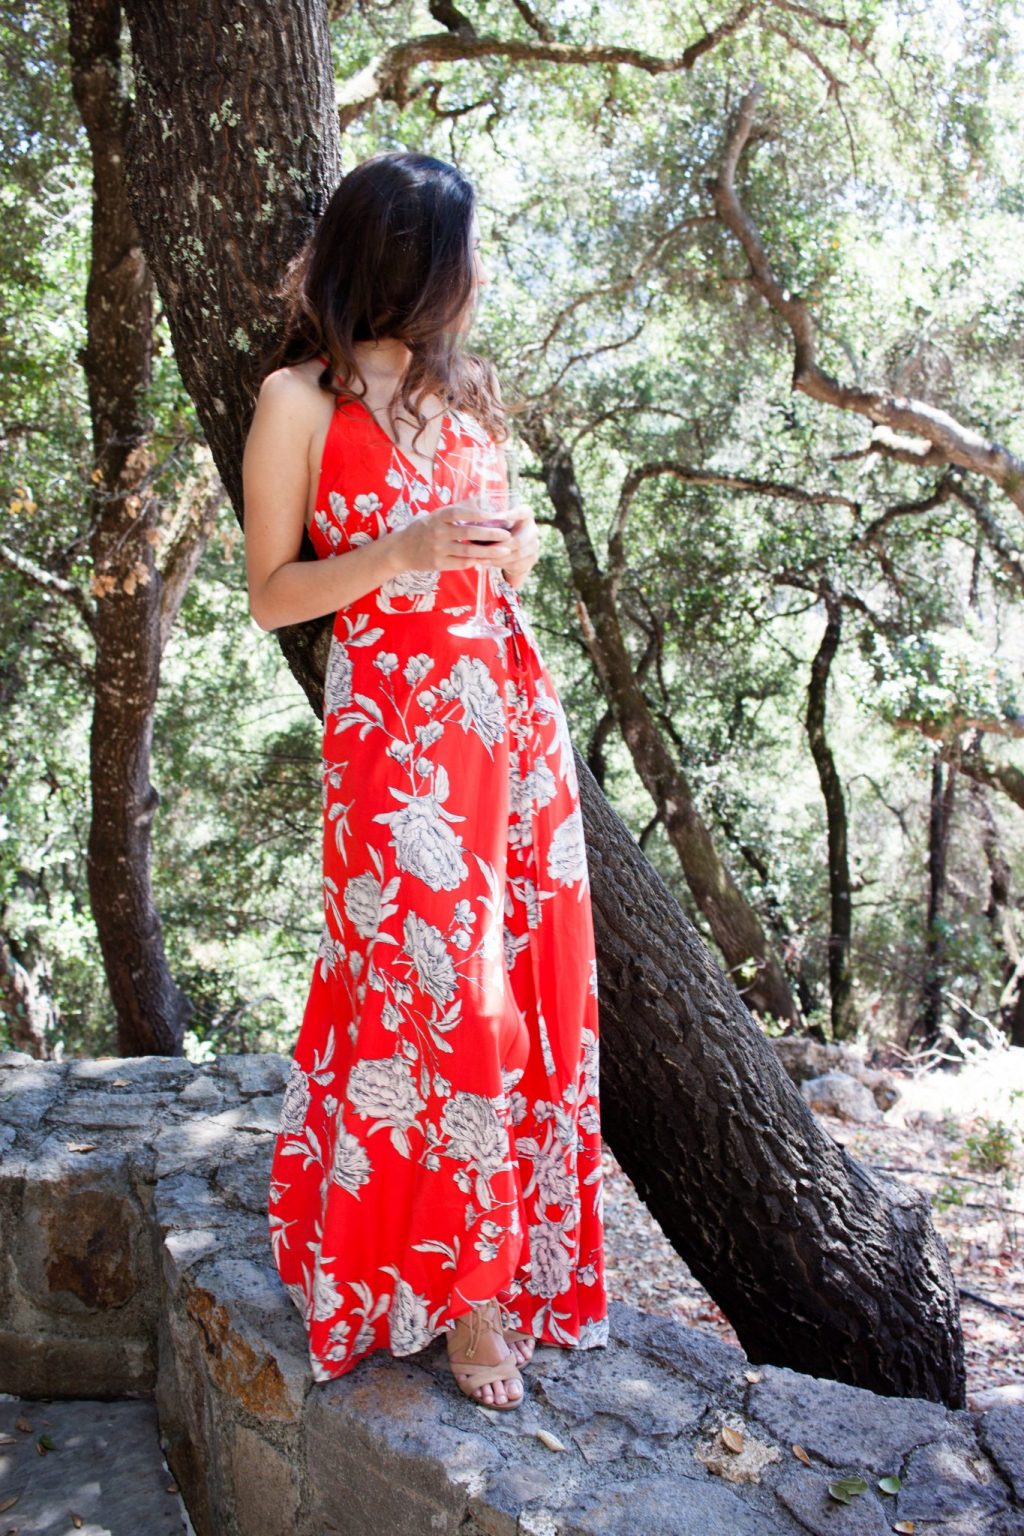 hall wines, rombauer winery, somerston estate wines, napa valley, wine country, what to wear in napa, maxi dress, yumi kim Rush Hour Maxi Dress in Red Carnation, Sam Edelman Yardley Lace Up Sandals, napa valley wineries, perata luxury tours